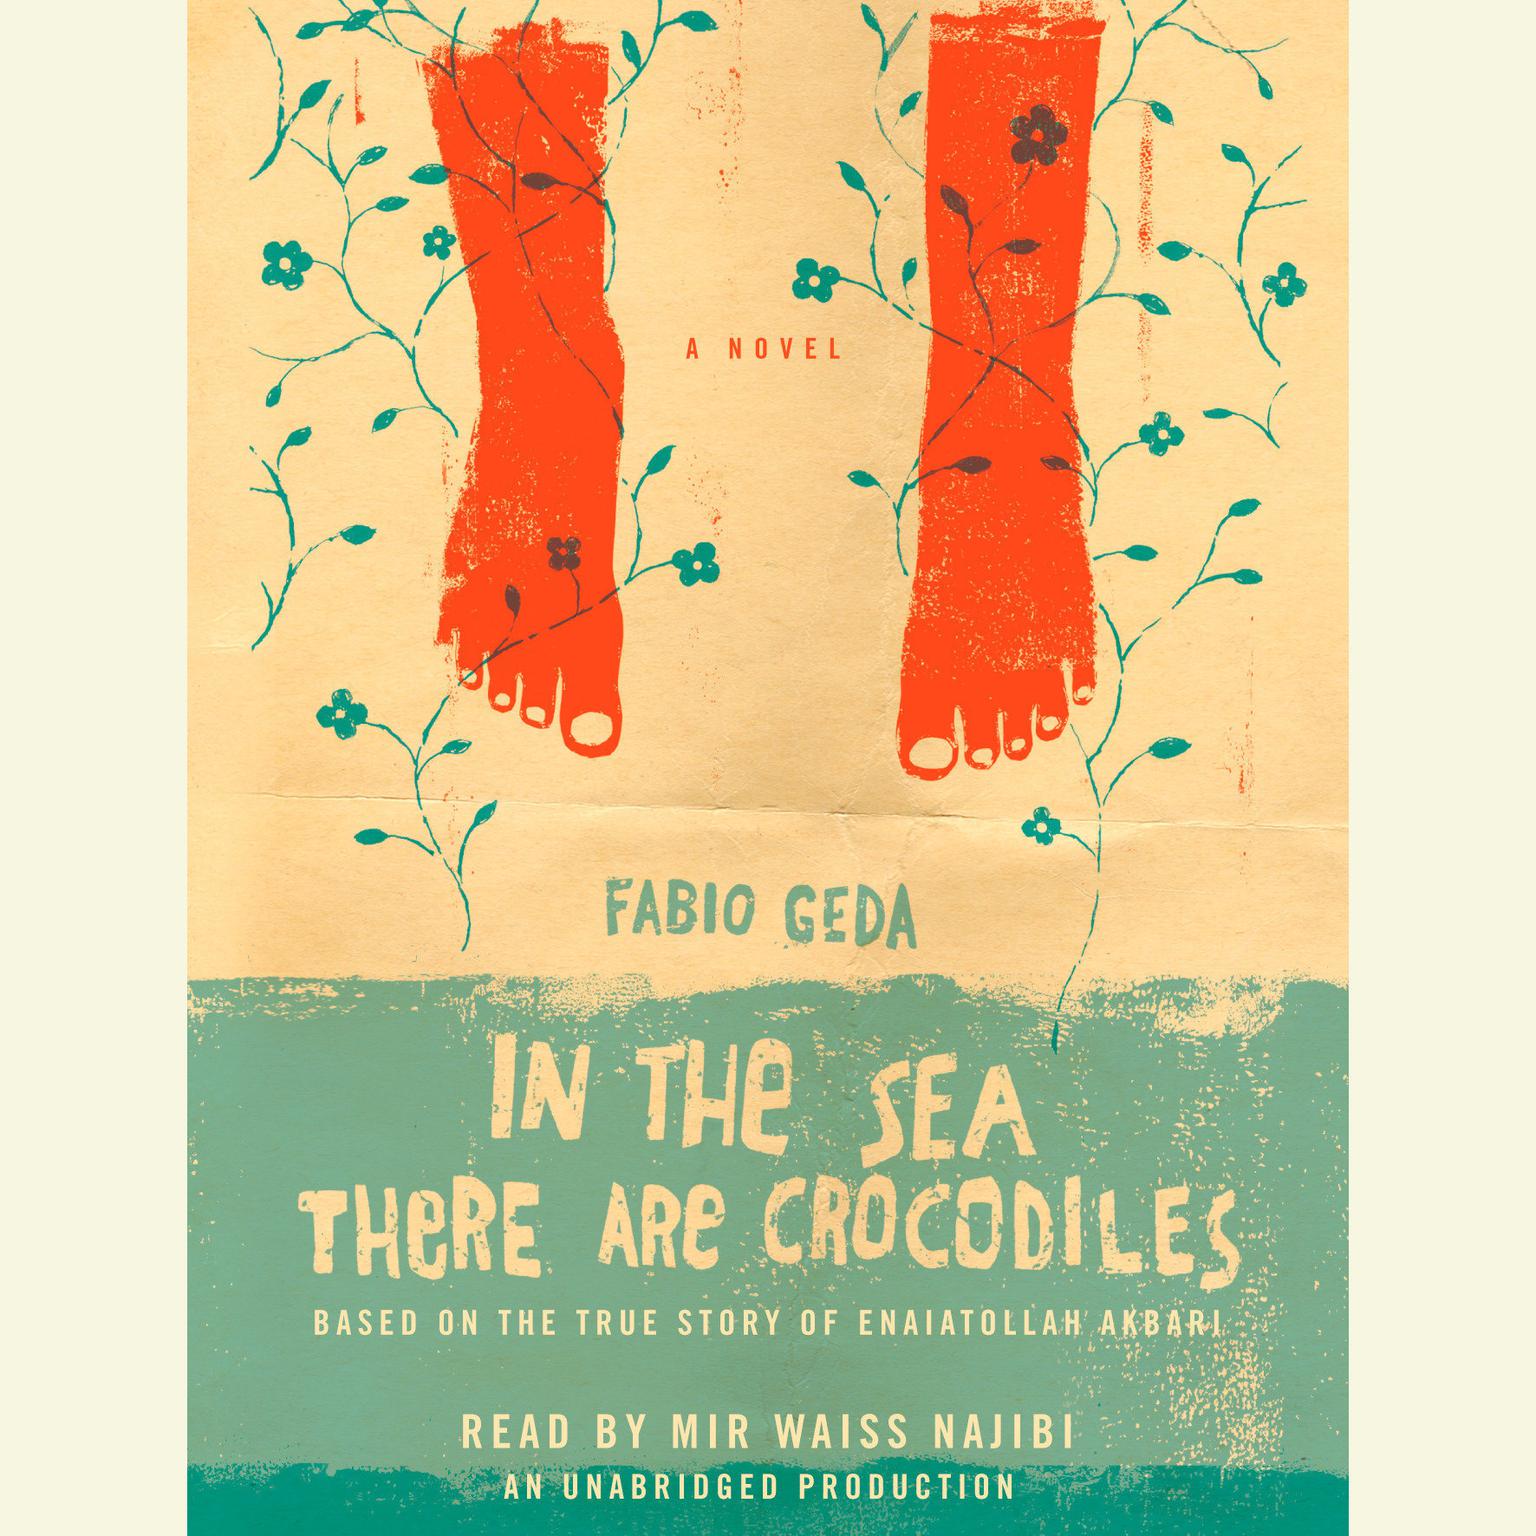 In the Sea There are Crocodiles: Based on the True Story of Enaiatollah Akbari Audiobook, by Fabio Geda